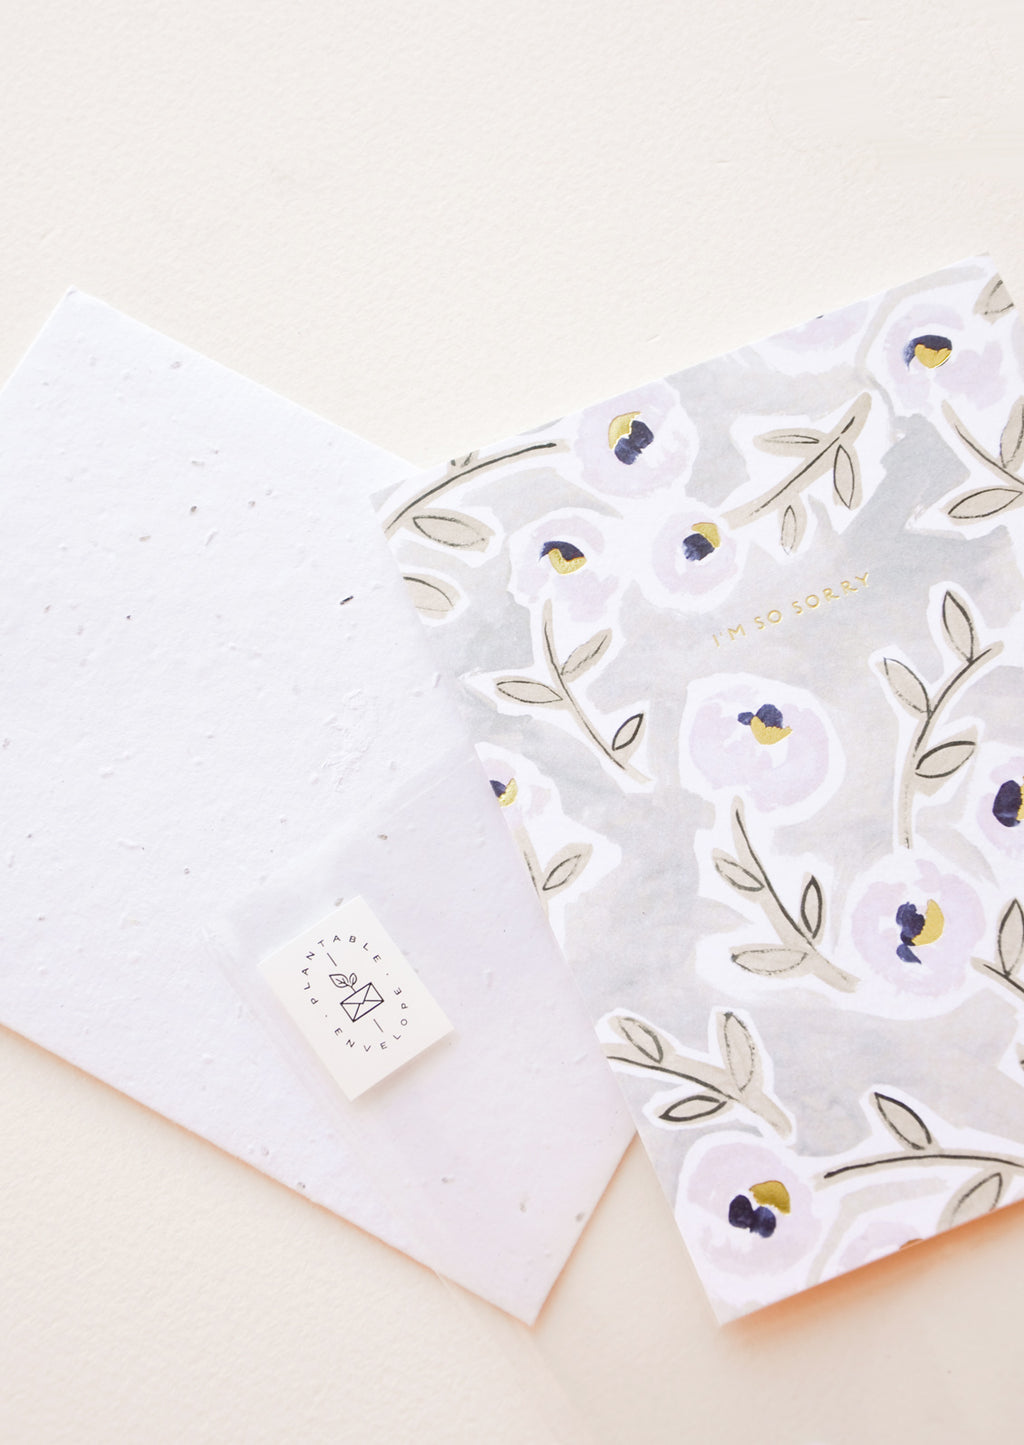 2: Greeting card with floral illustration and "i'm so sorry" written in small gold foil.